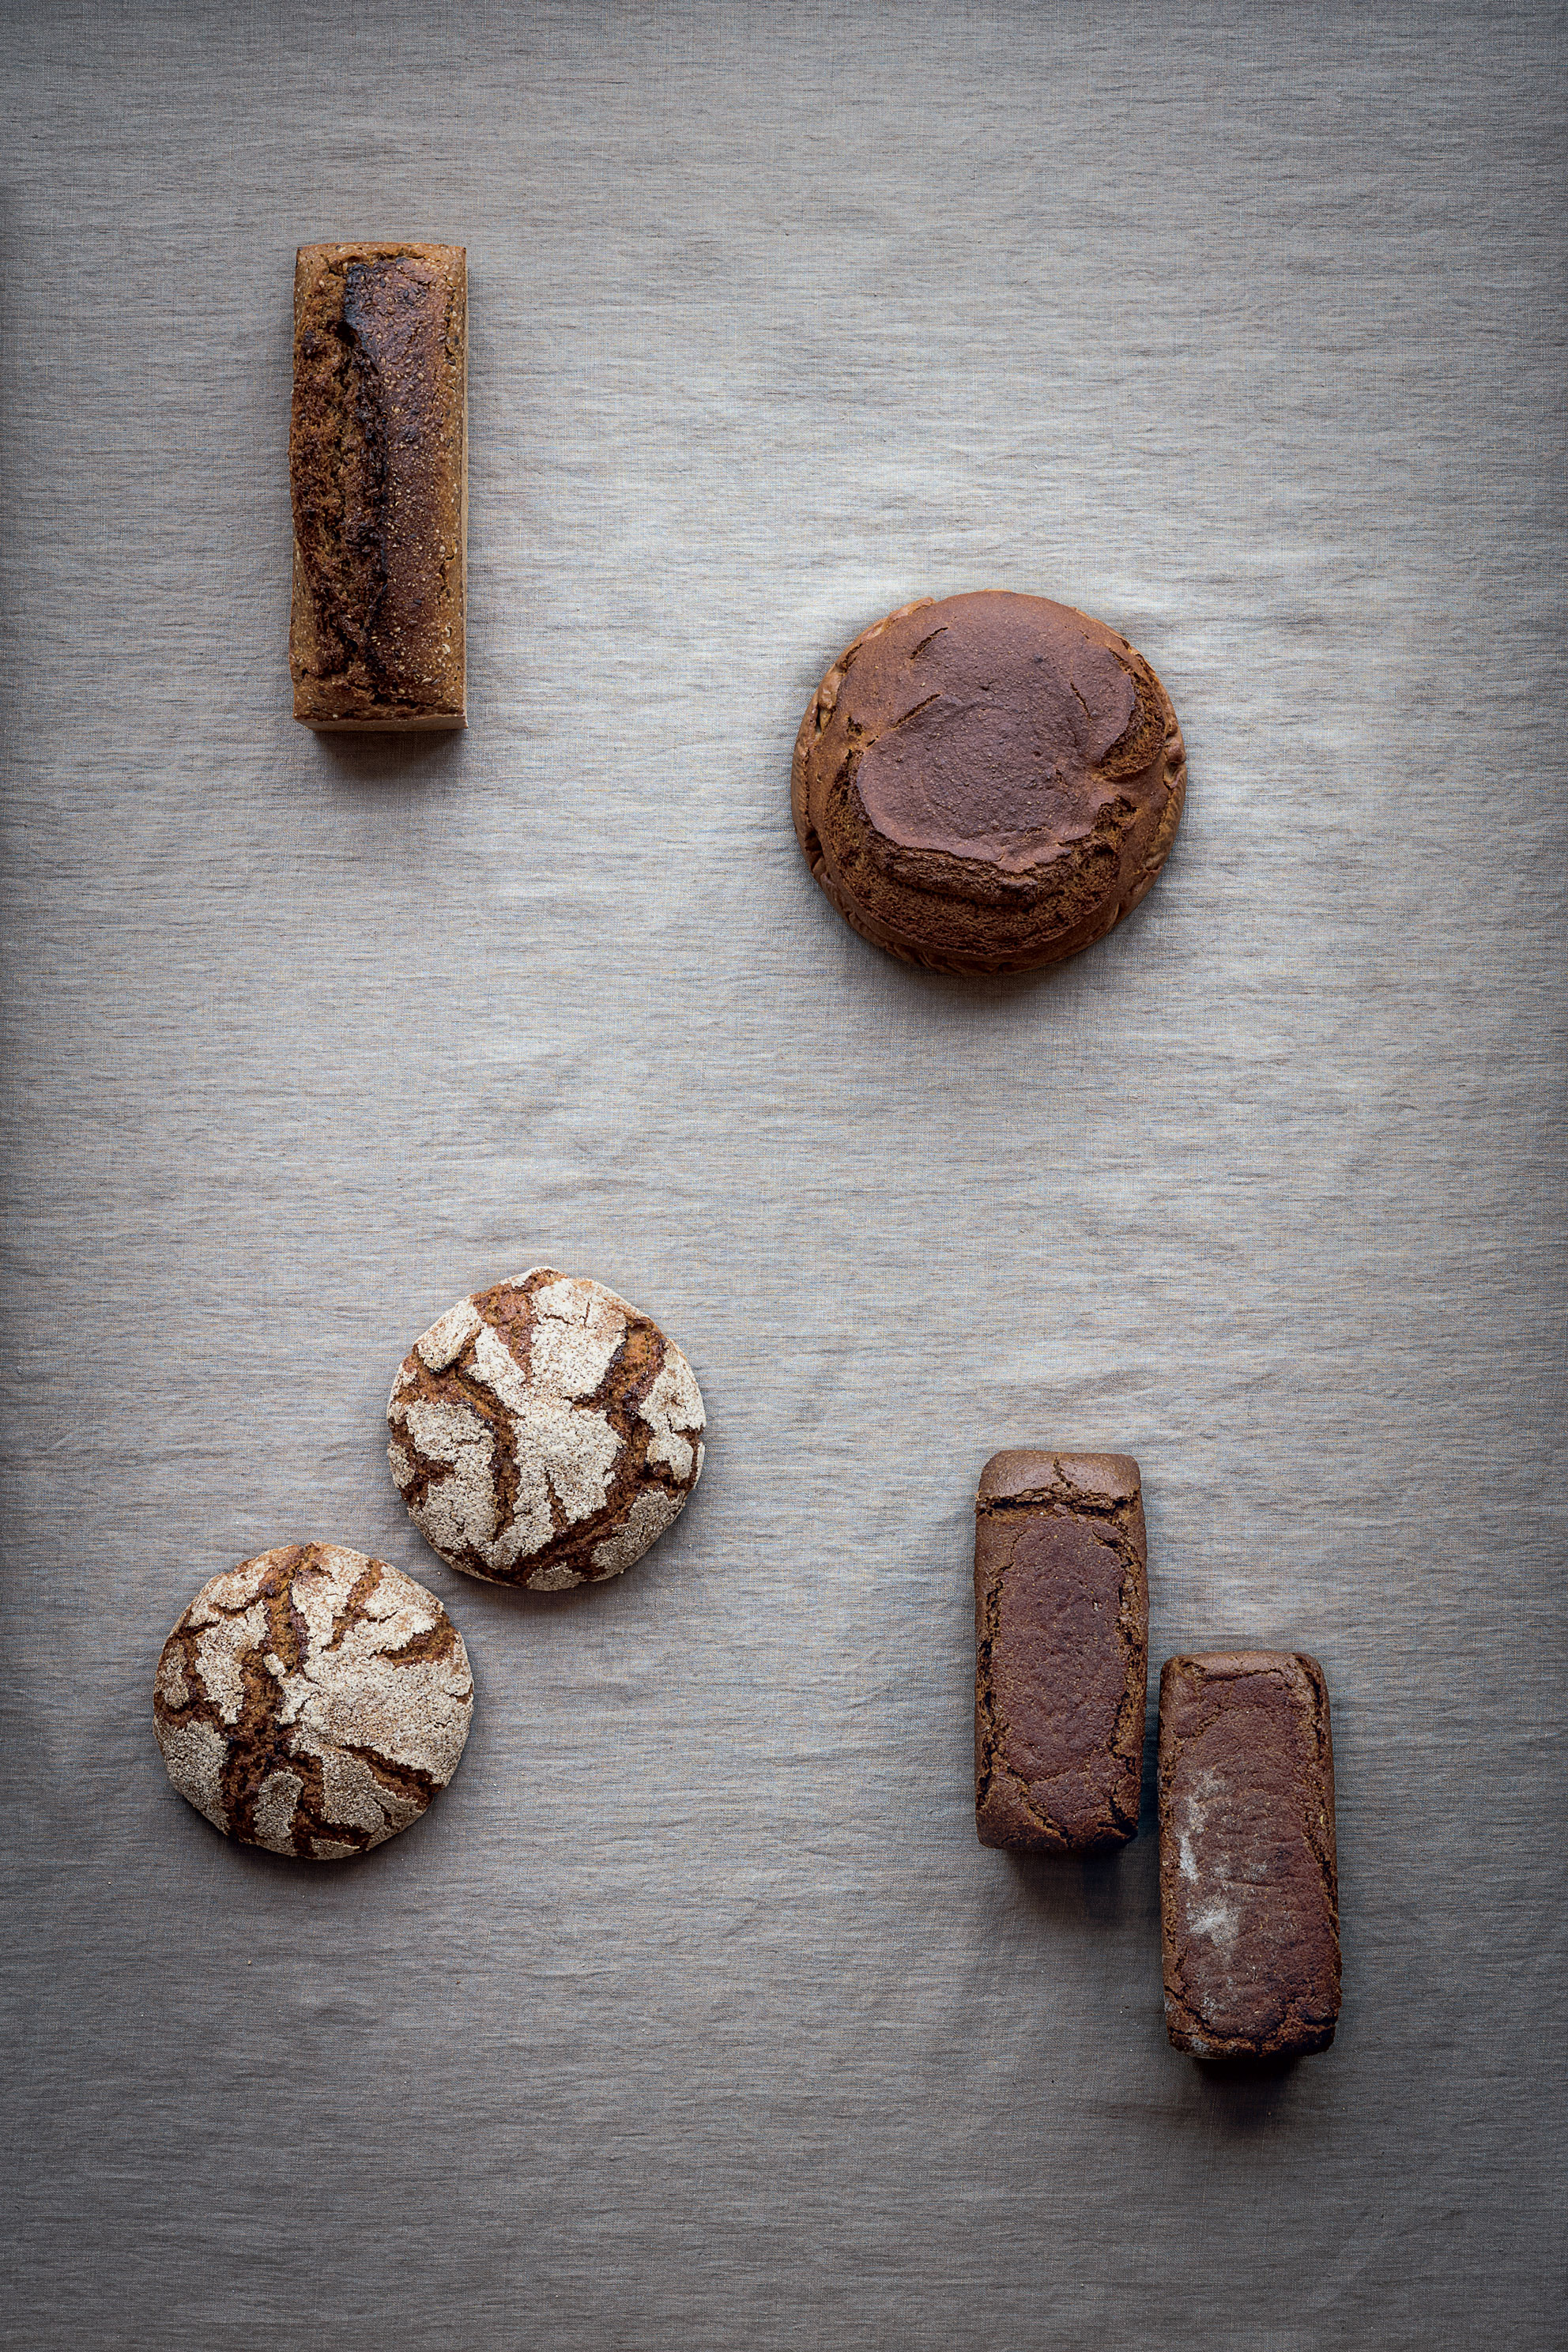 Nordic rye breads, from The Nordic Baking Book